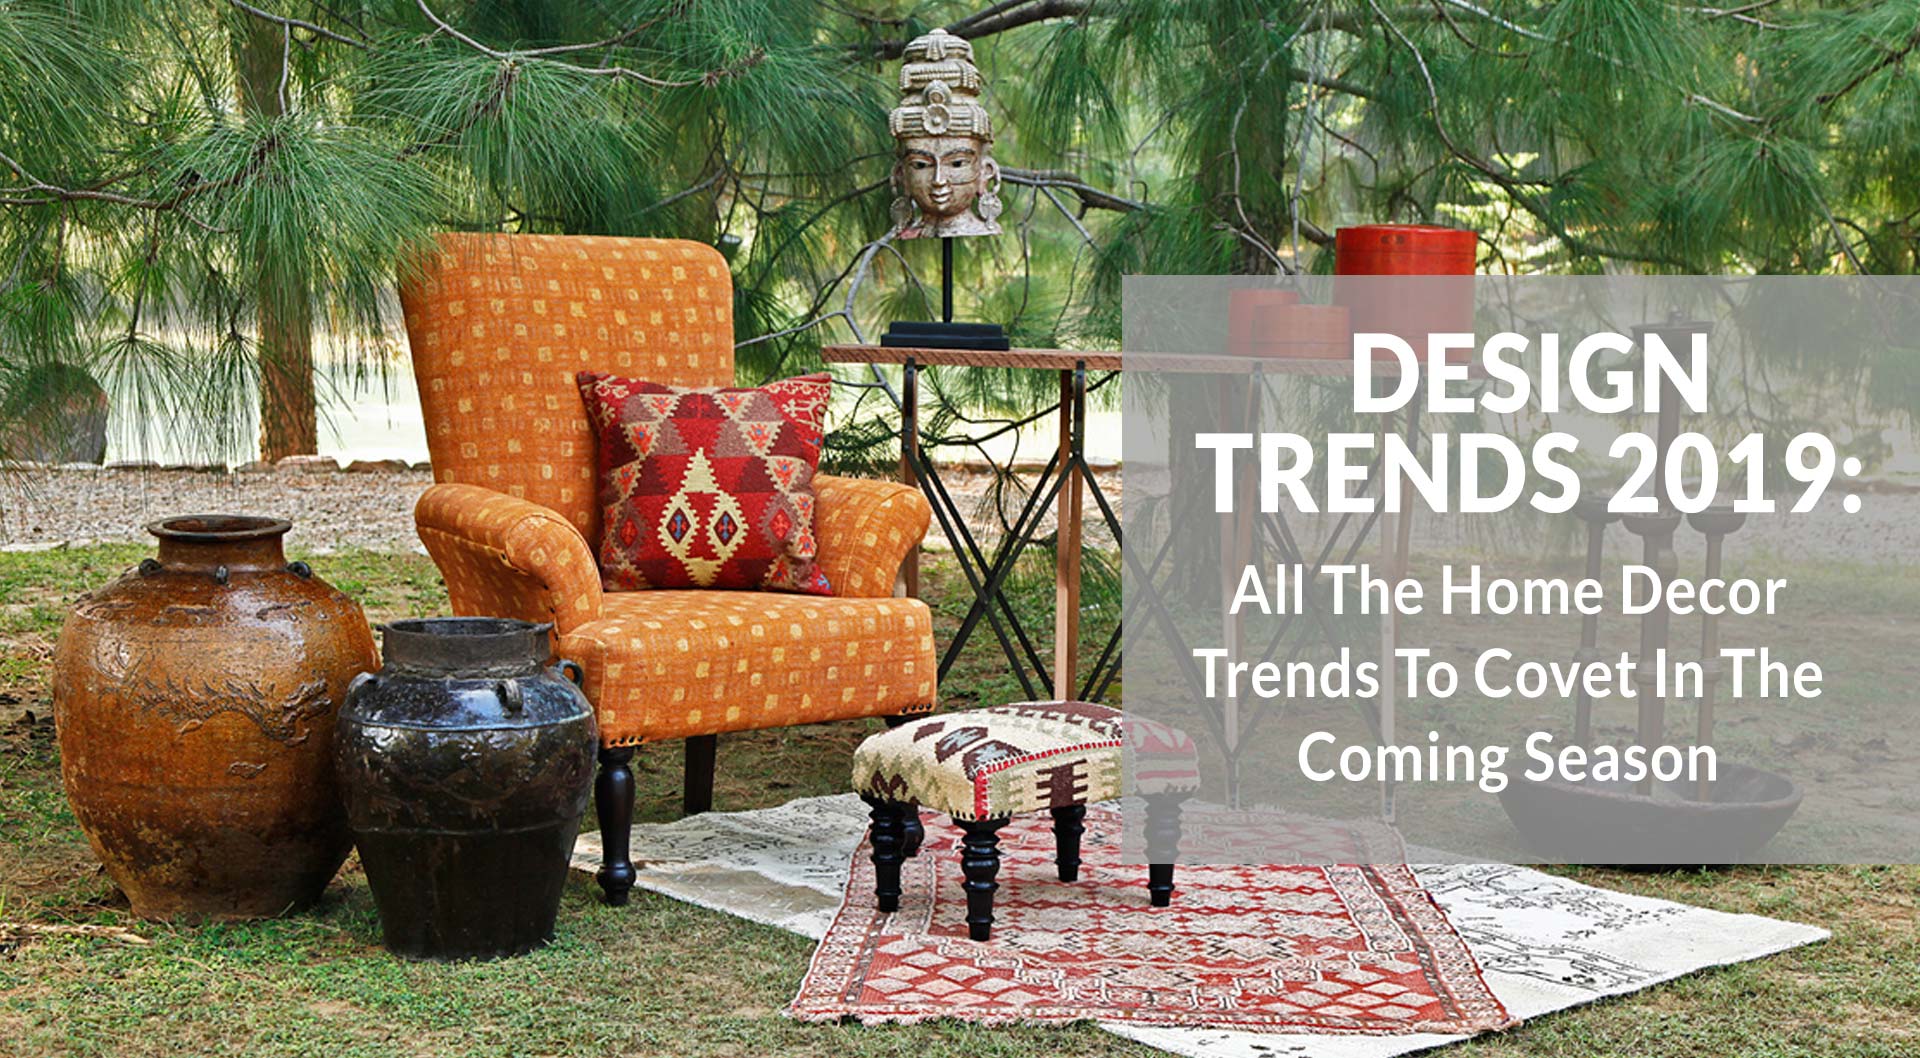 Design Trends 2019: All The Home Decor Trends To Covet In The Coming Season